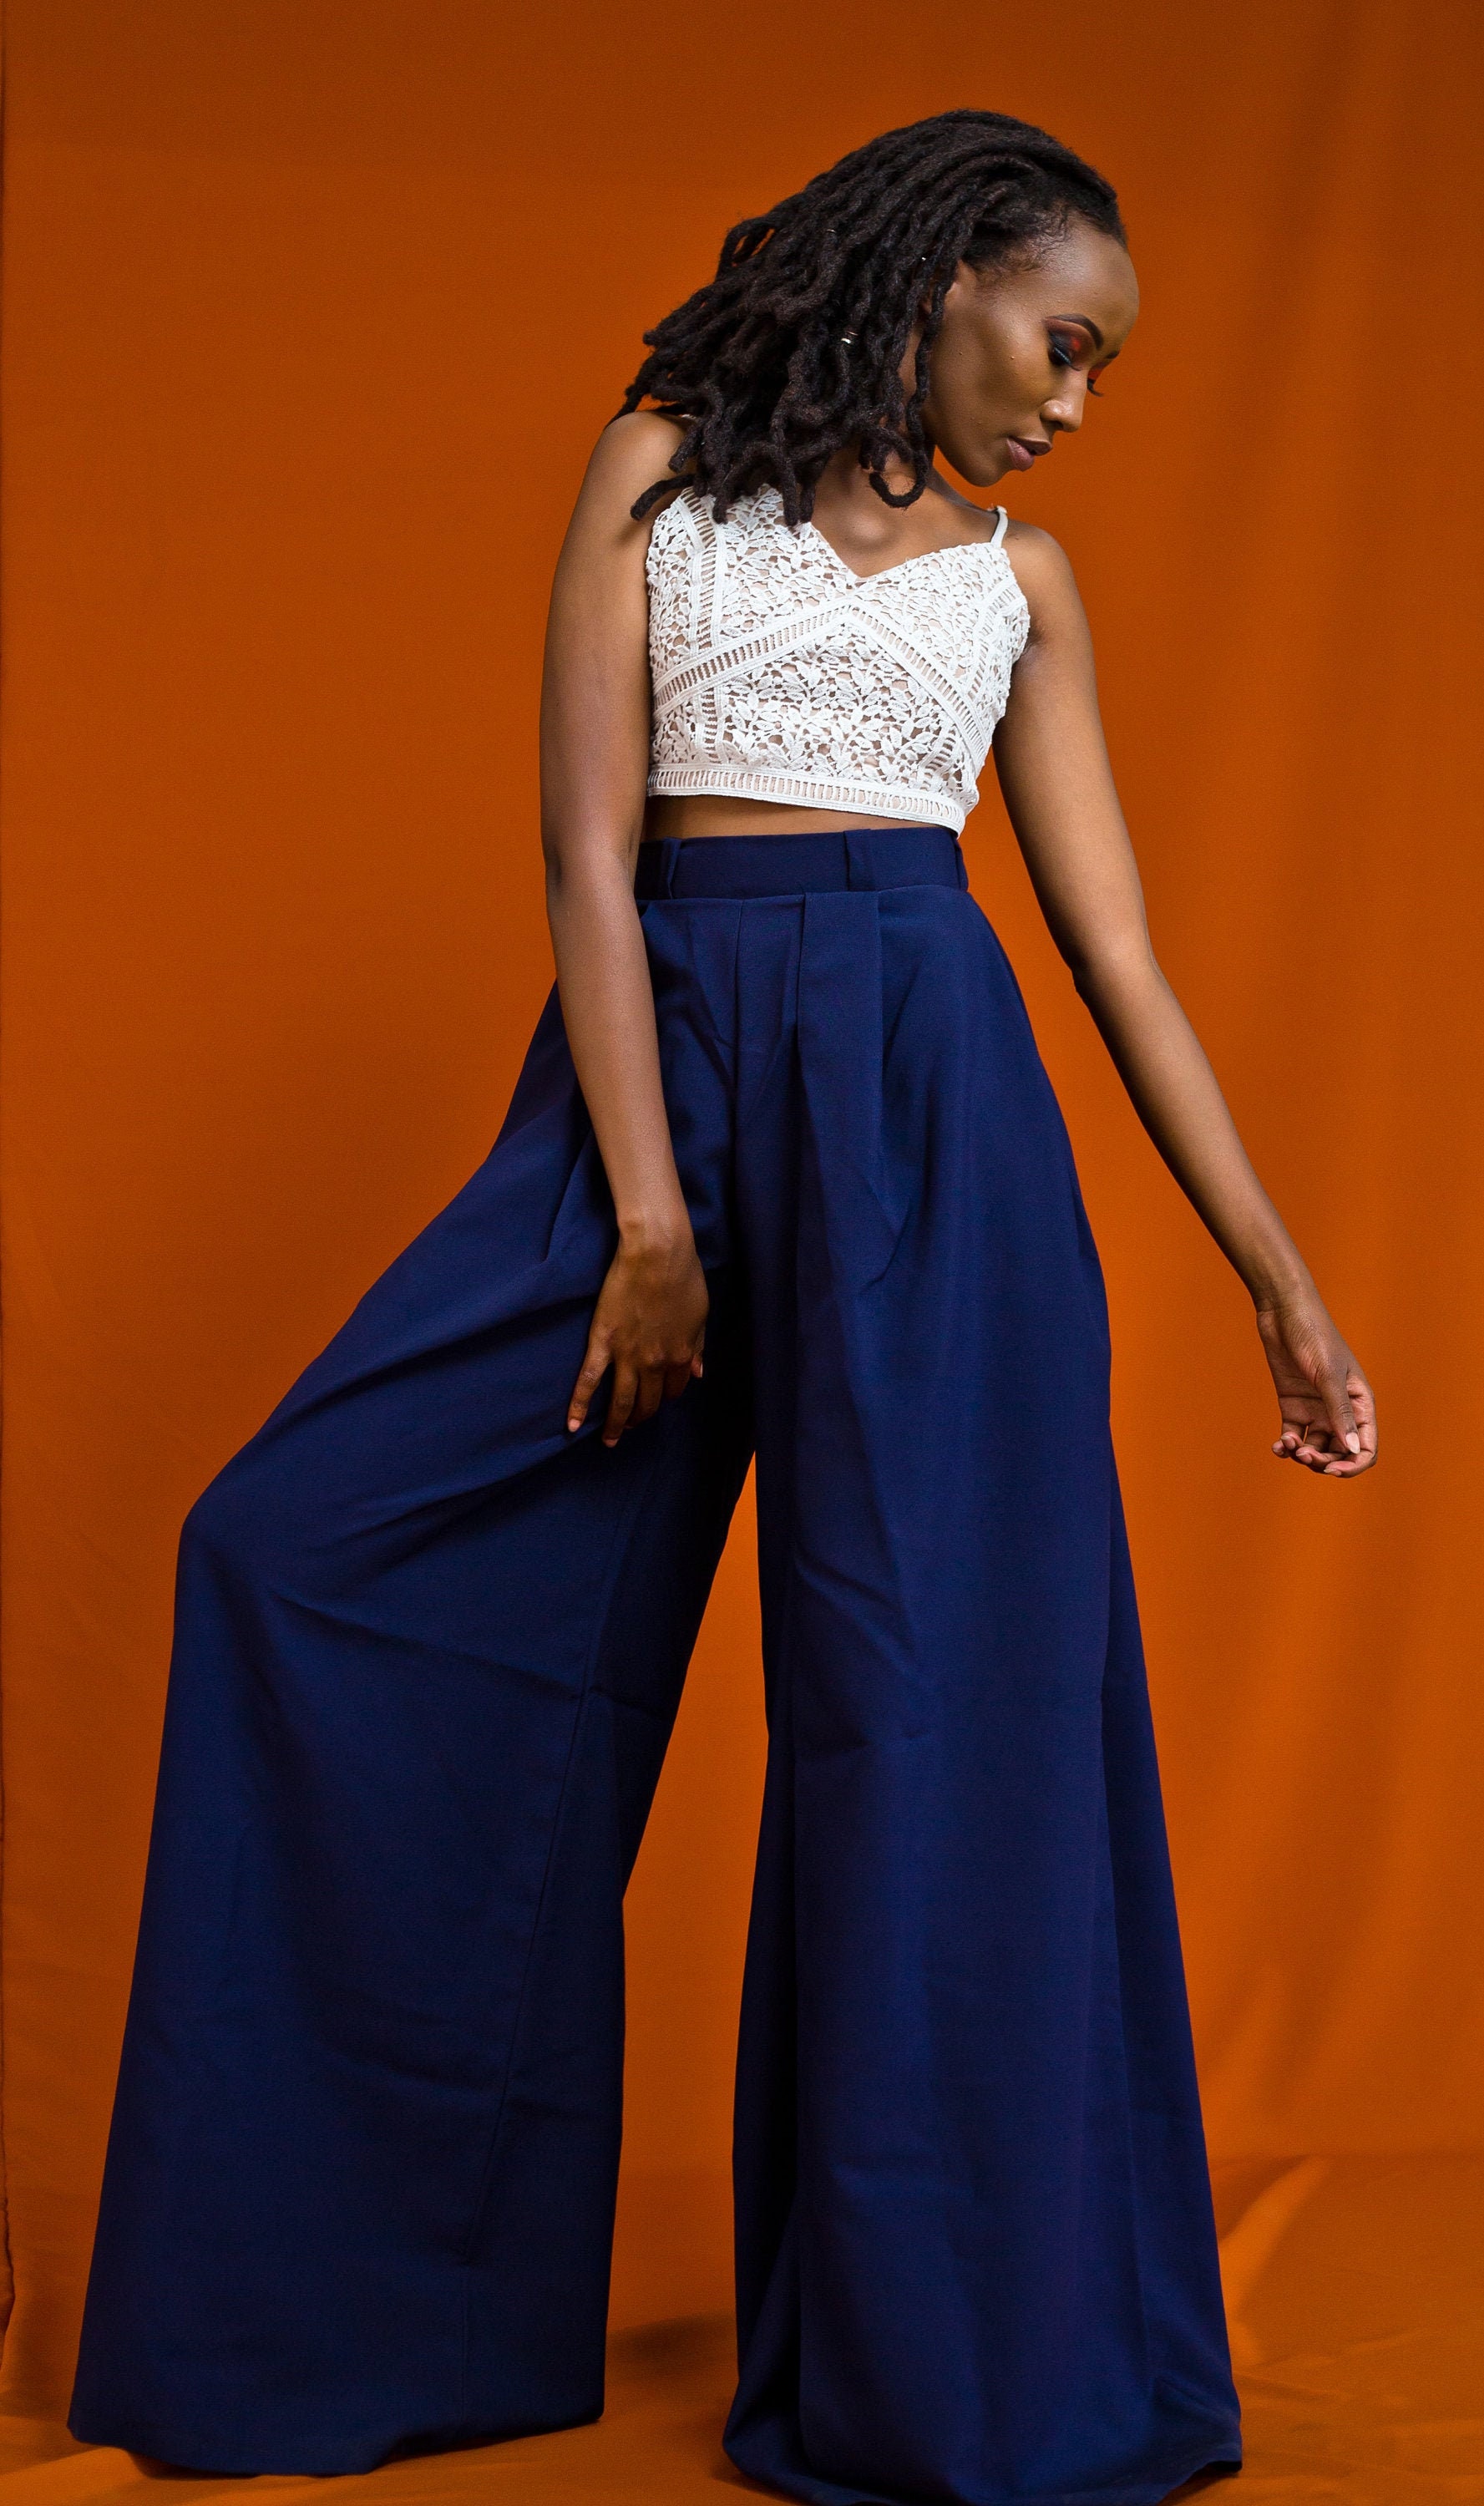 Wide Leg Pants - Ethically Made Fashion by MULXIPLY